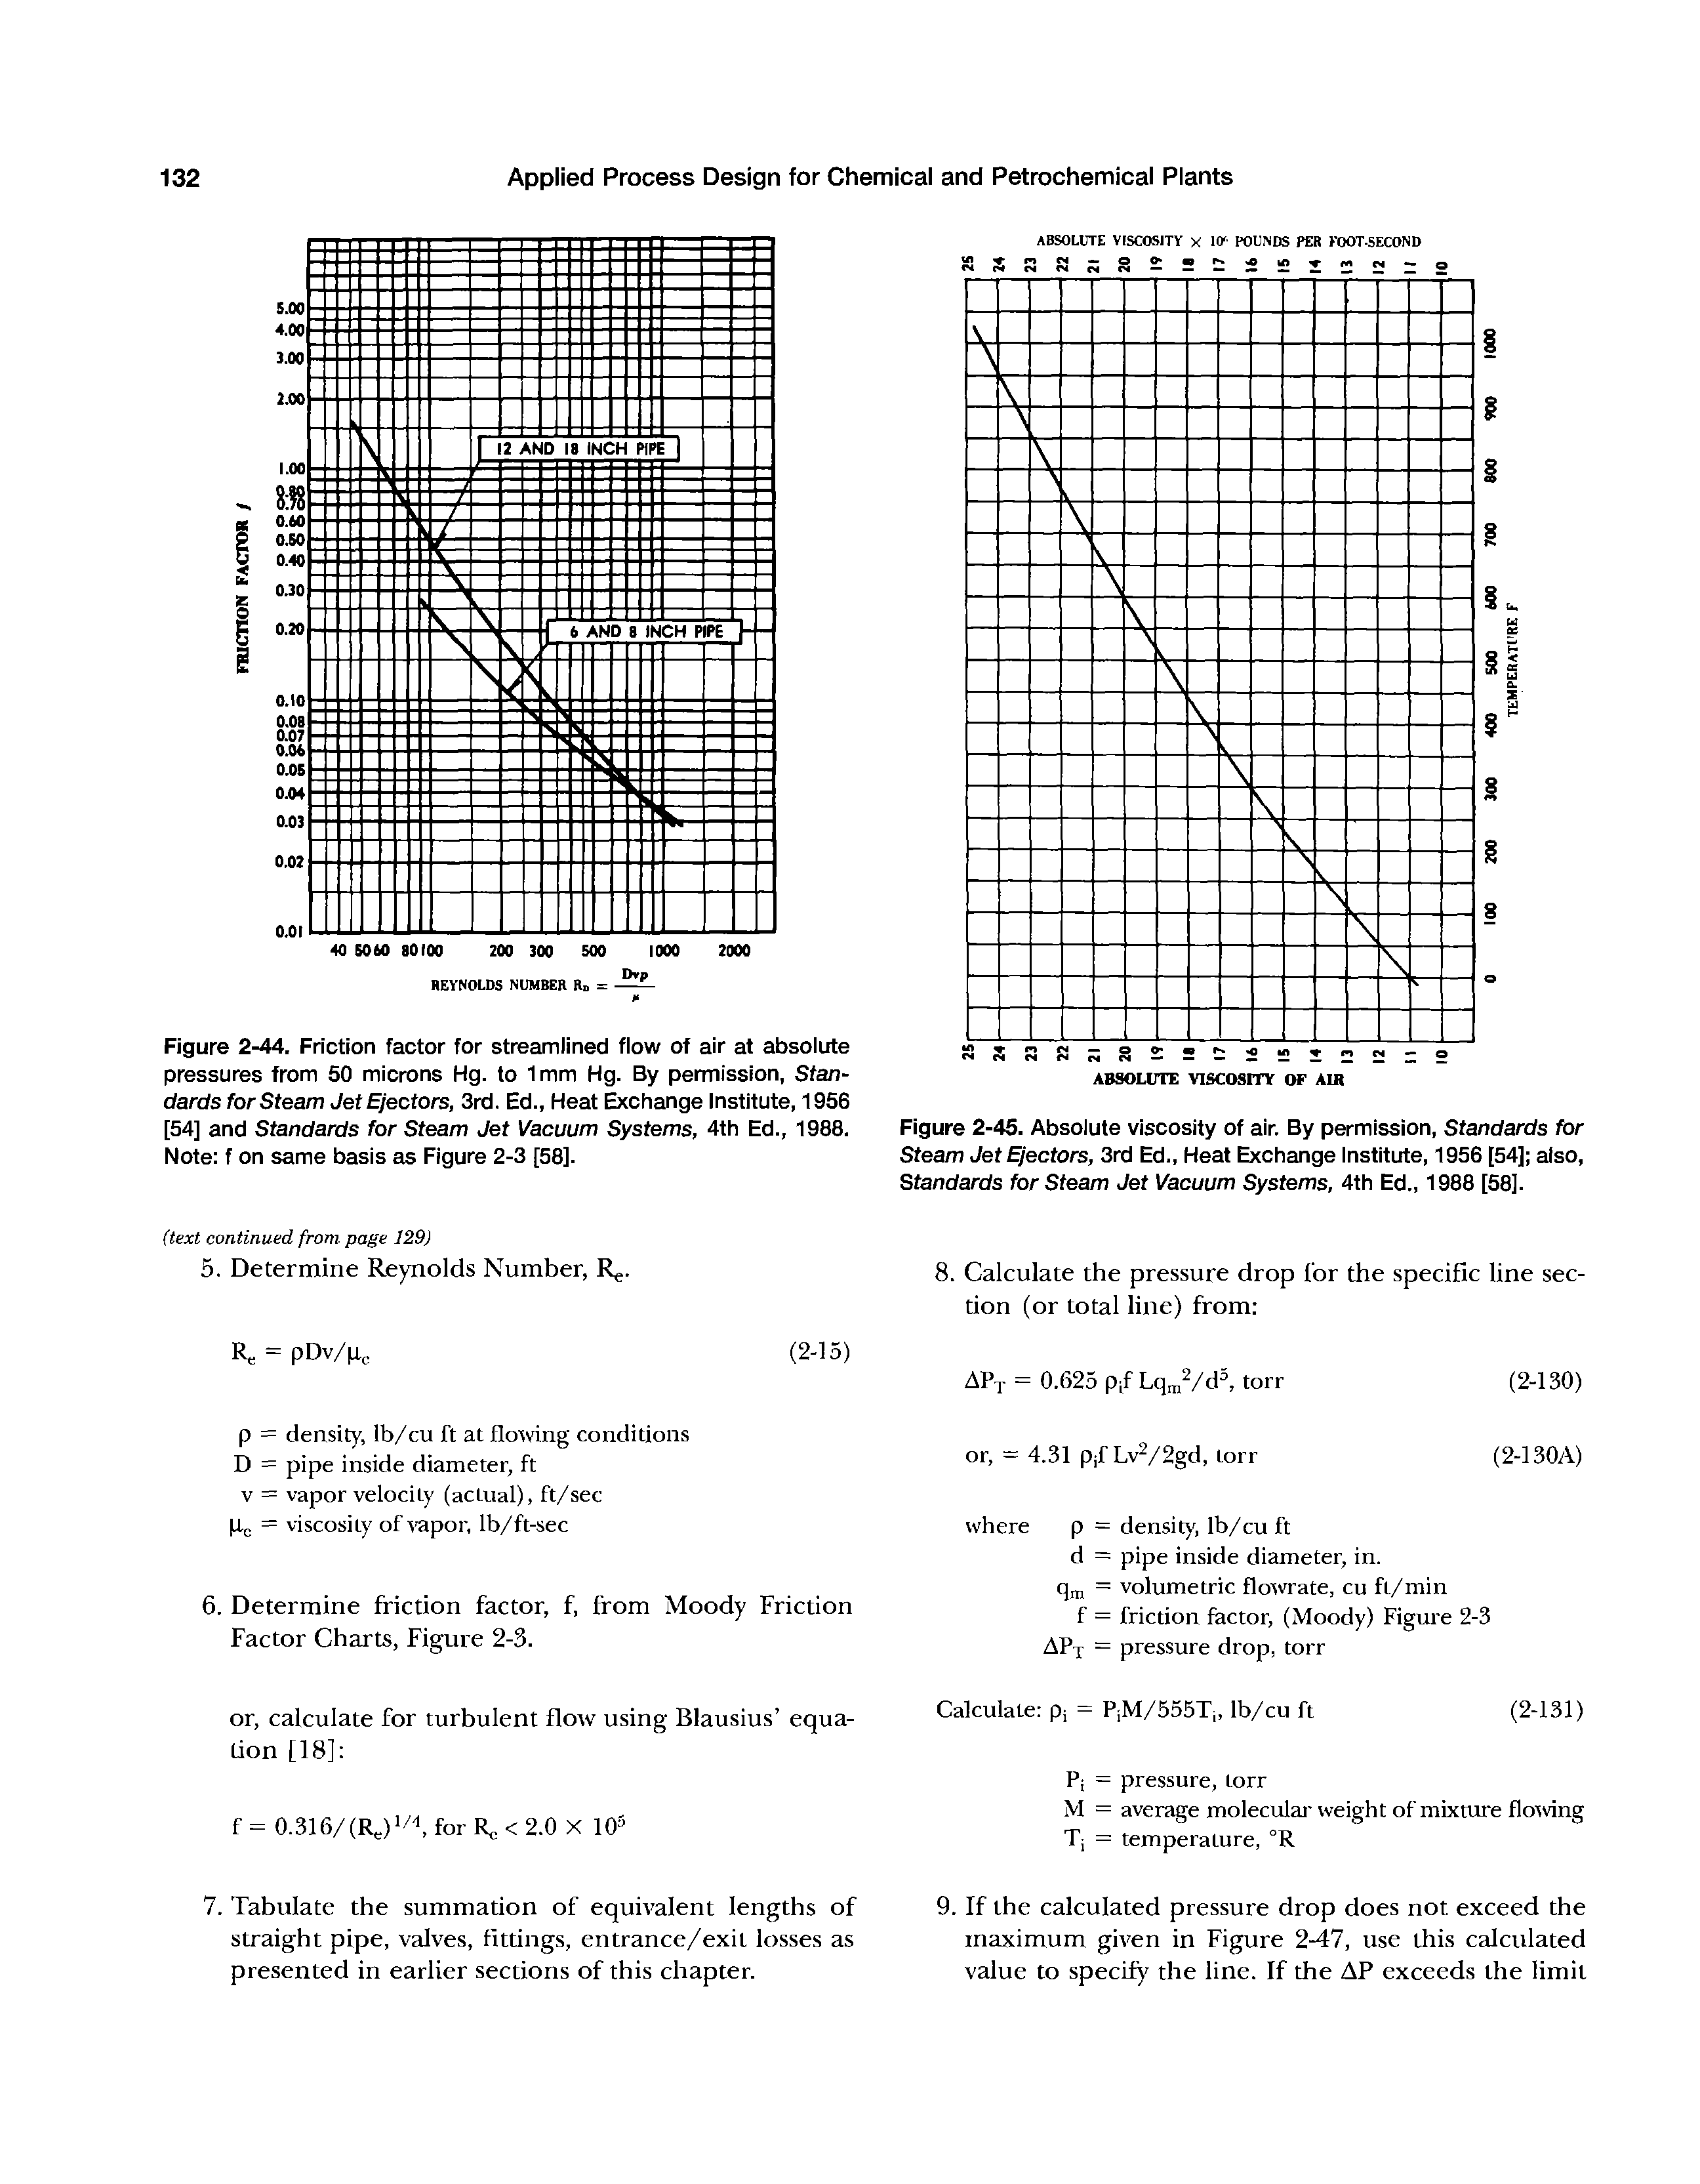 Figure 2-45. Absolute viscosity of air. By permission. Standards for Steam Jet Ejectors, 3rd Ed., Heat Exchange Institute, 1956 [54] also. Standards for Steam Jet Vacuum Systems, 4th Ed., 1988 [58].